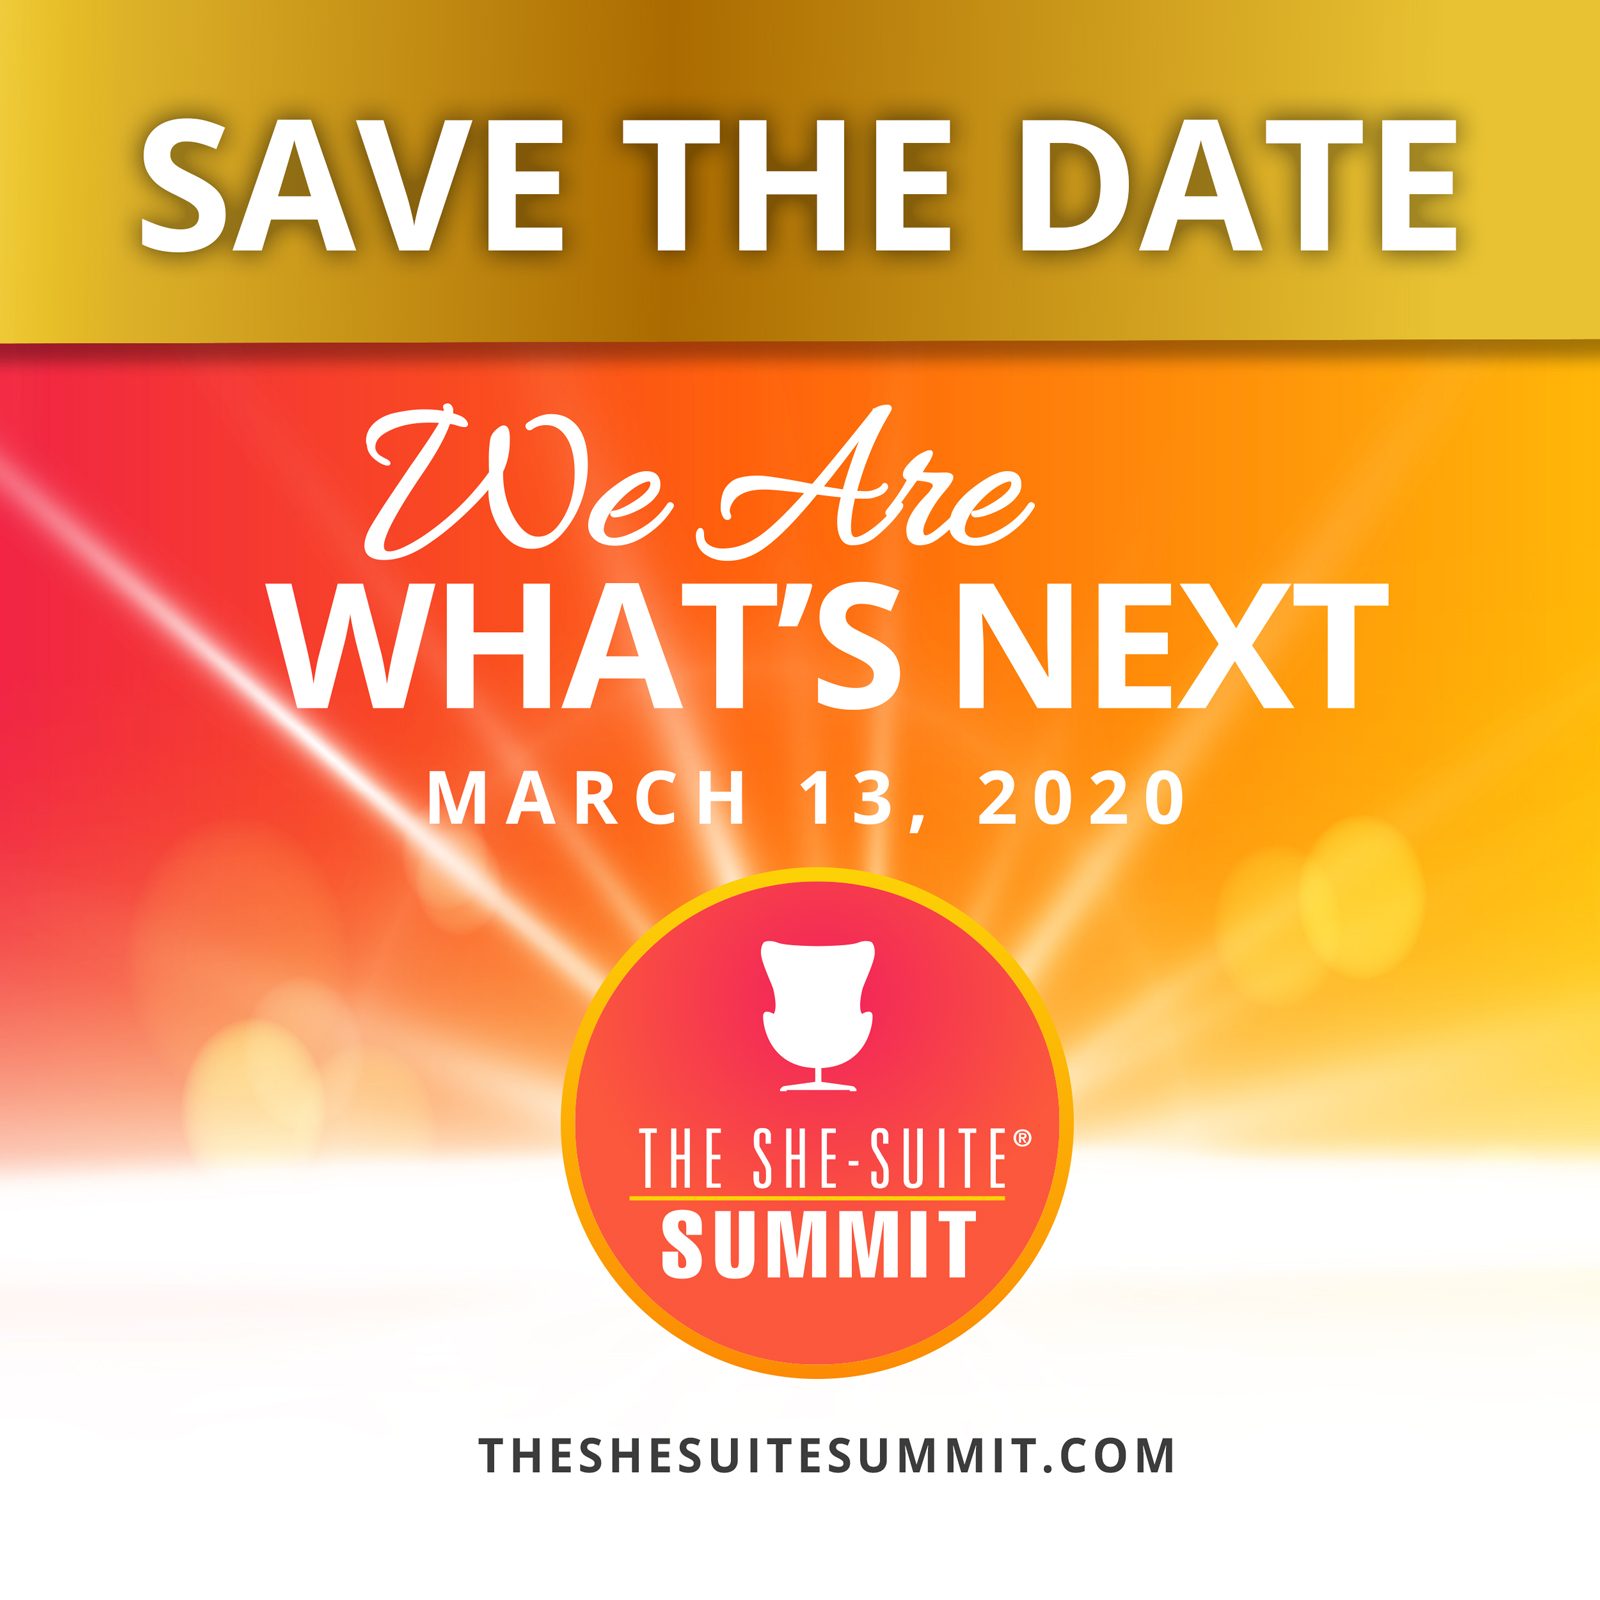 The She Suite Summit We Are What's Next Diversity and Flexibility